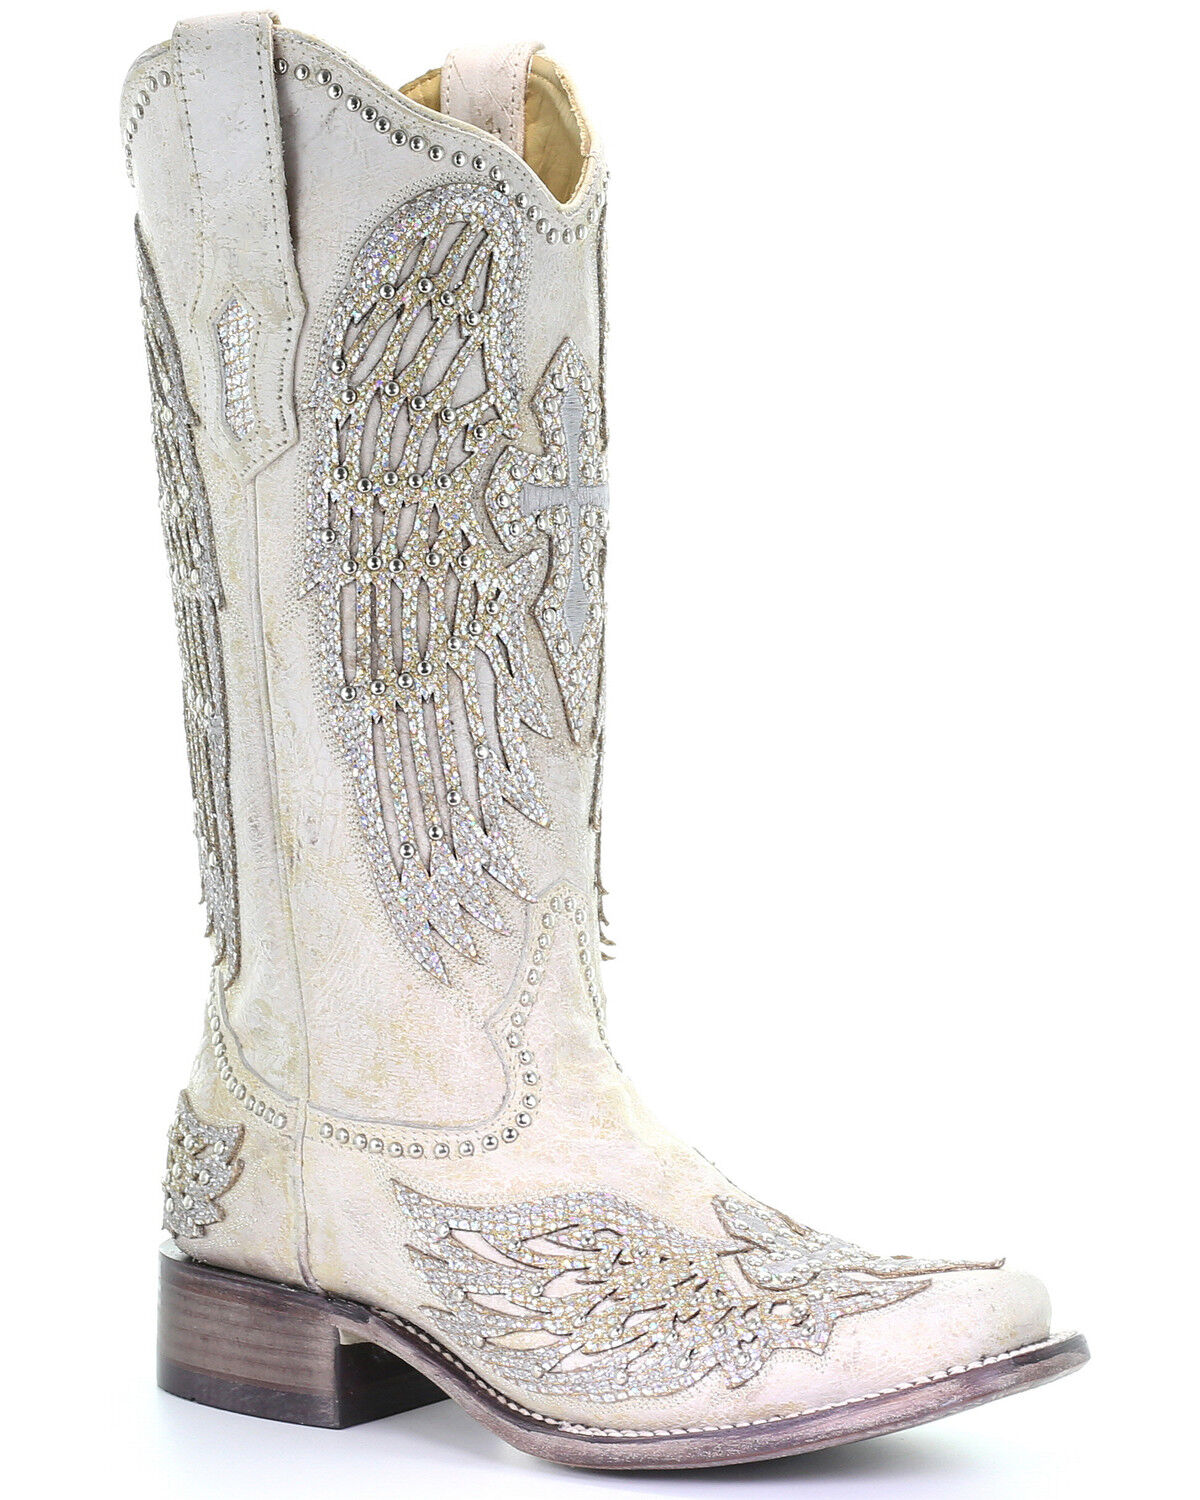 blingy cowgirl boots